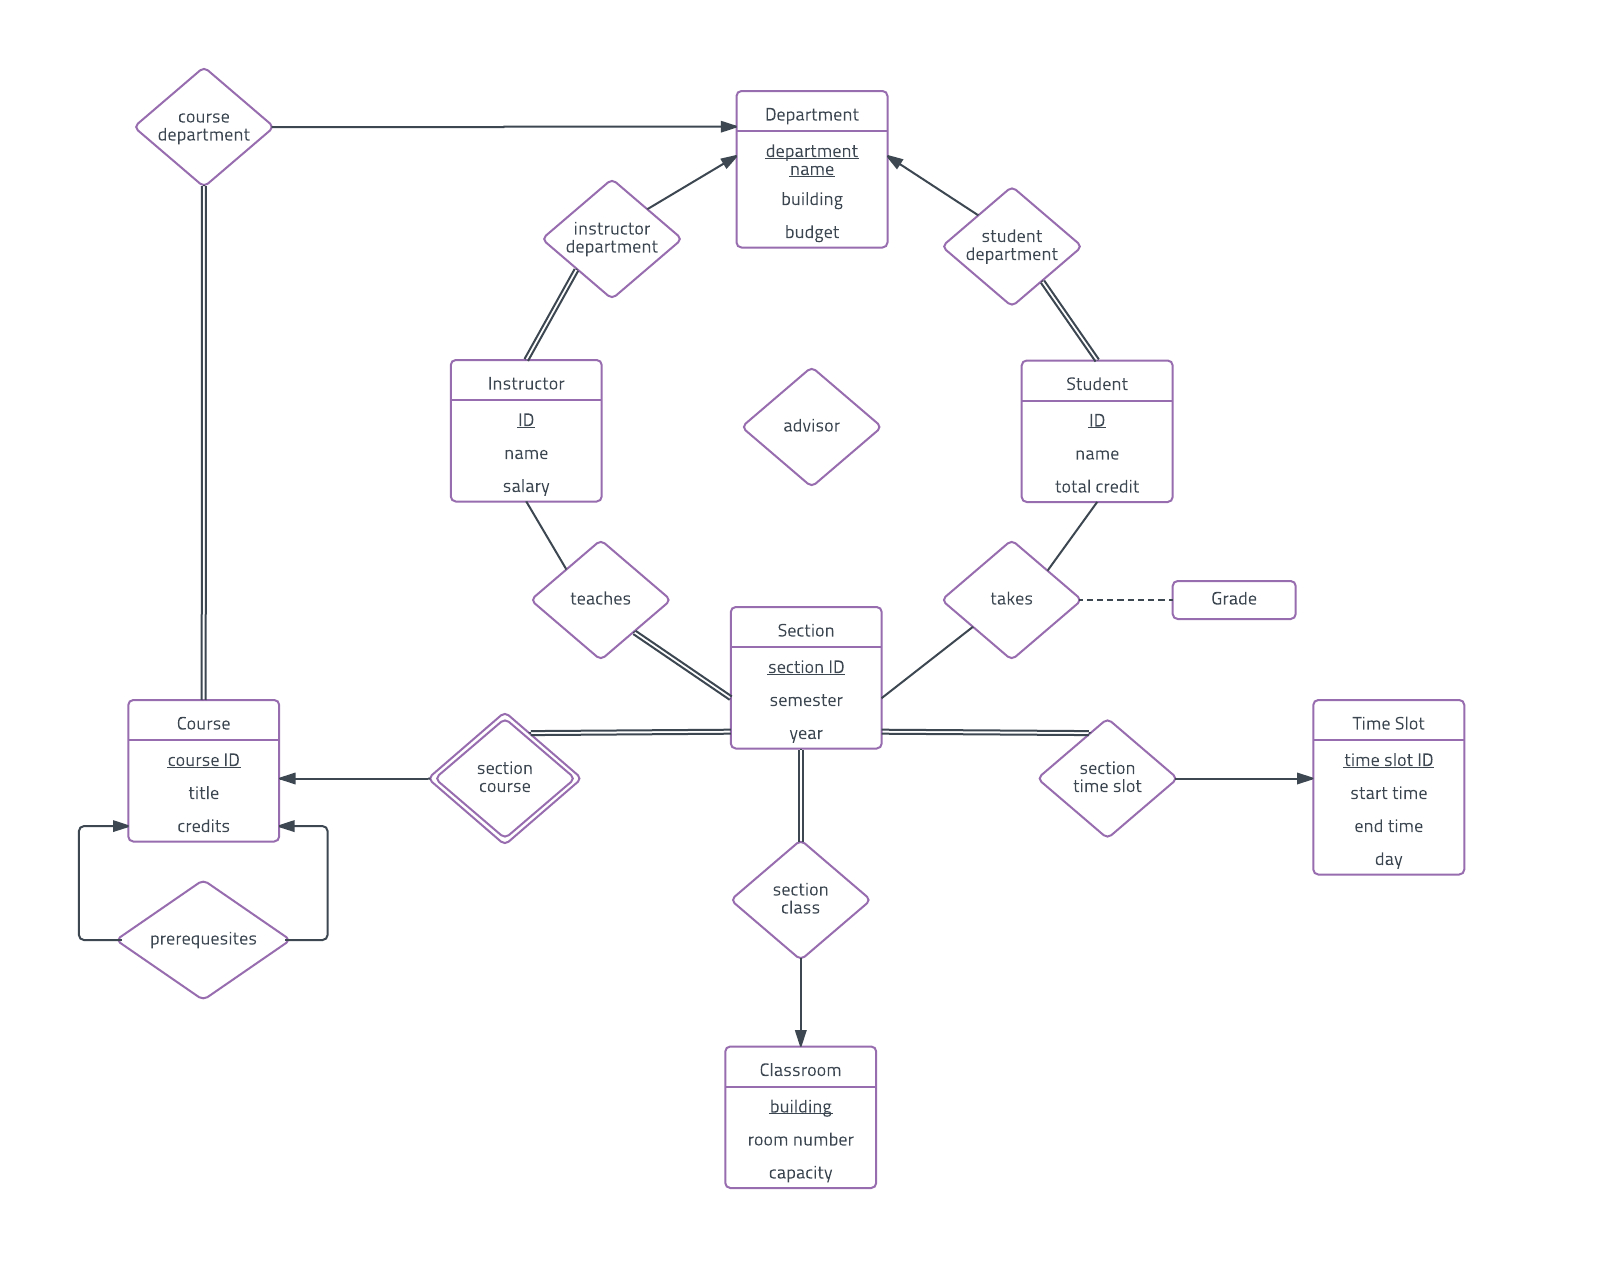 Er Diagram Examples And Templates | Lucidchart for Er Diagram Signs